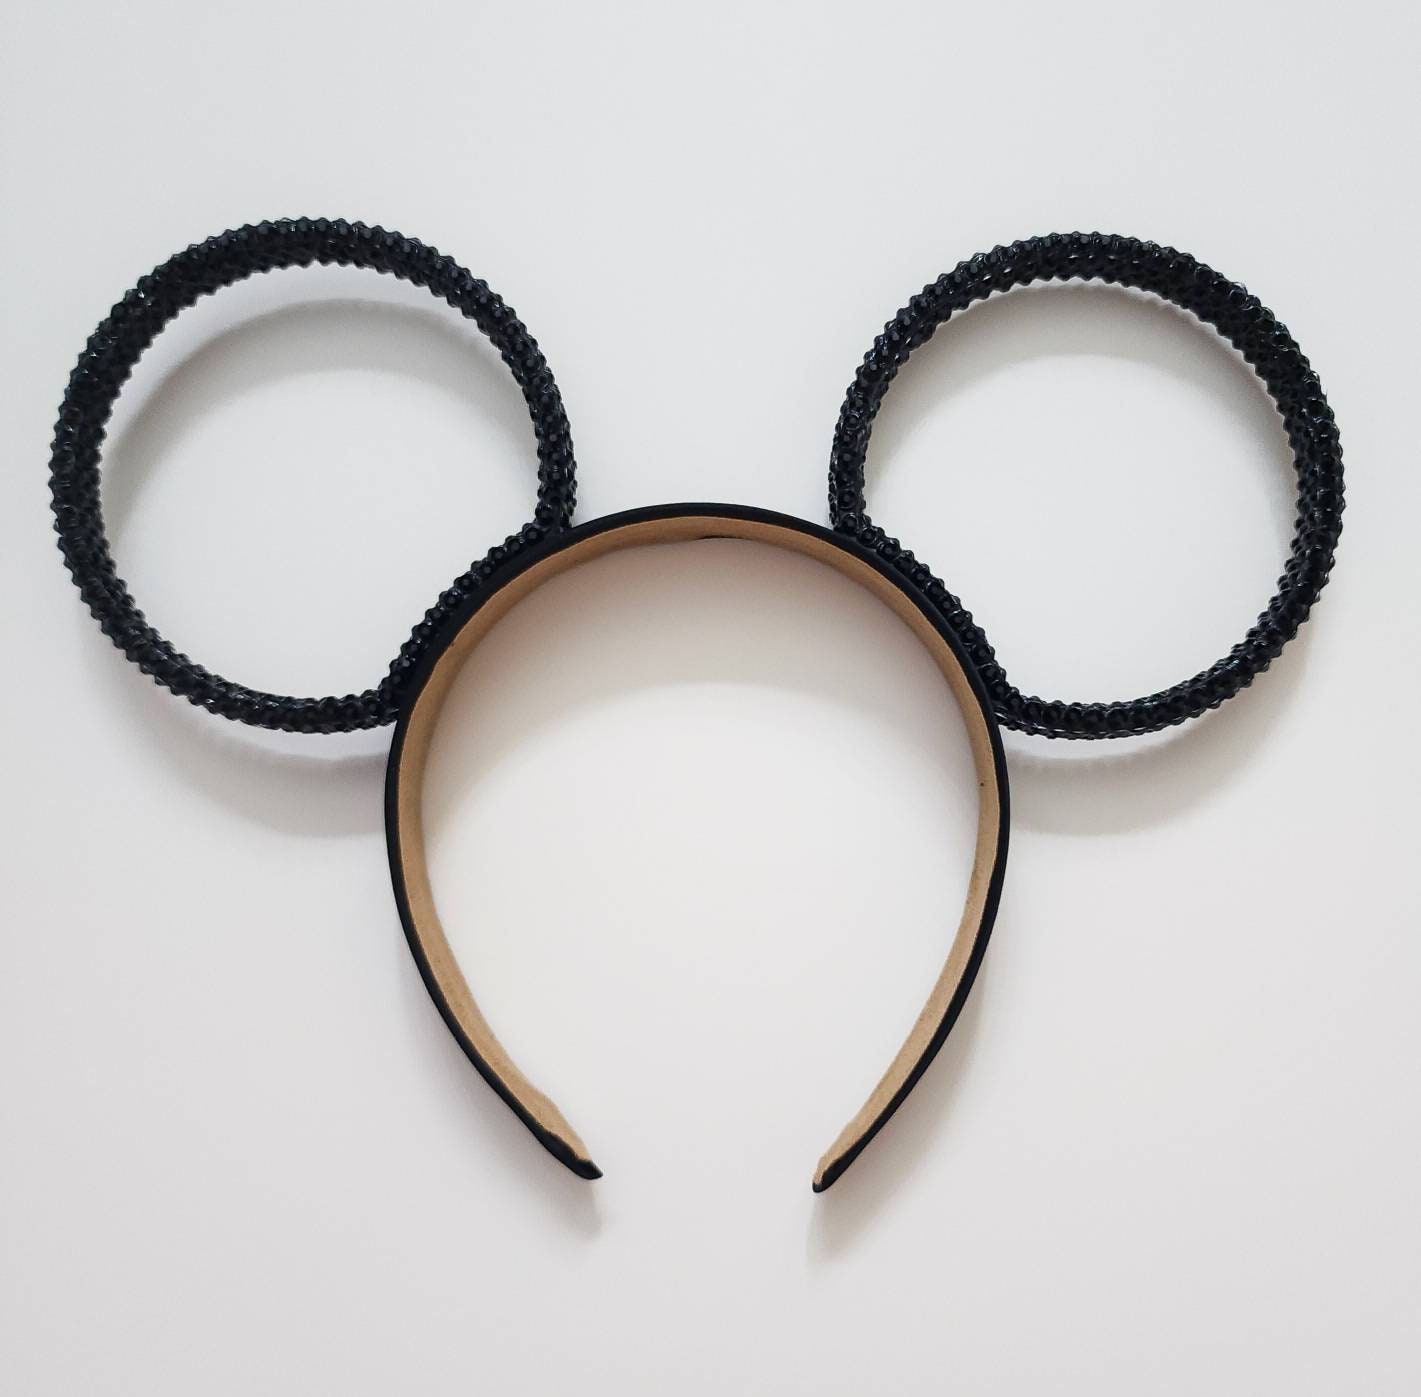 Magic Mountain ears ORIGINAL design-Black Rhinestone rings 3D Mouse Ears all sides covered with high quality rhinestones